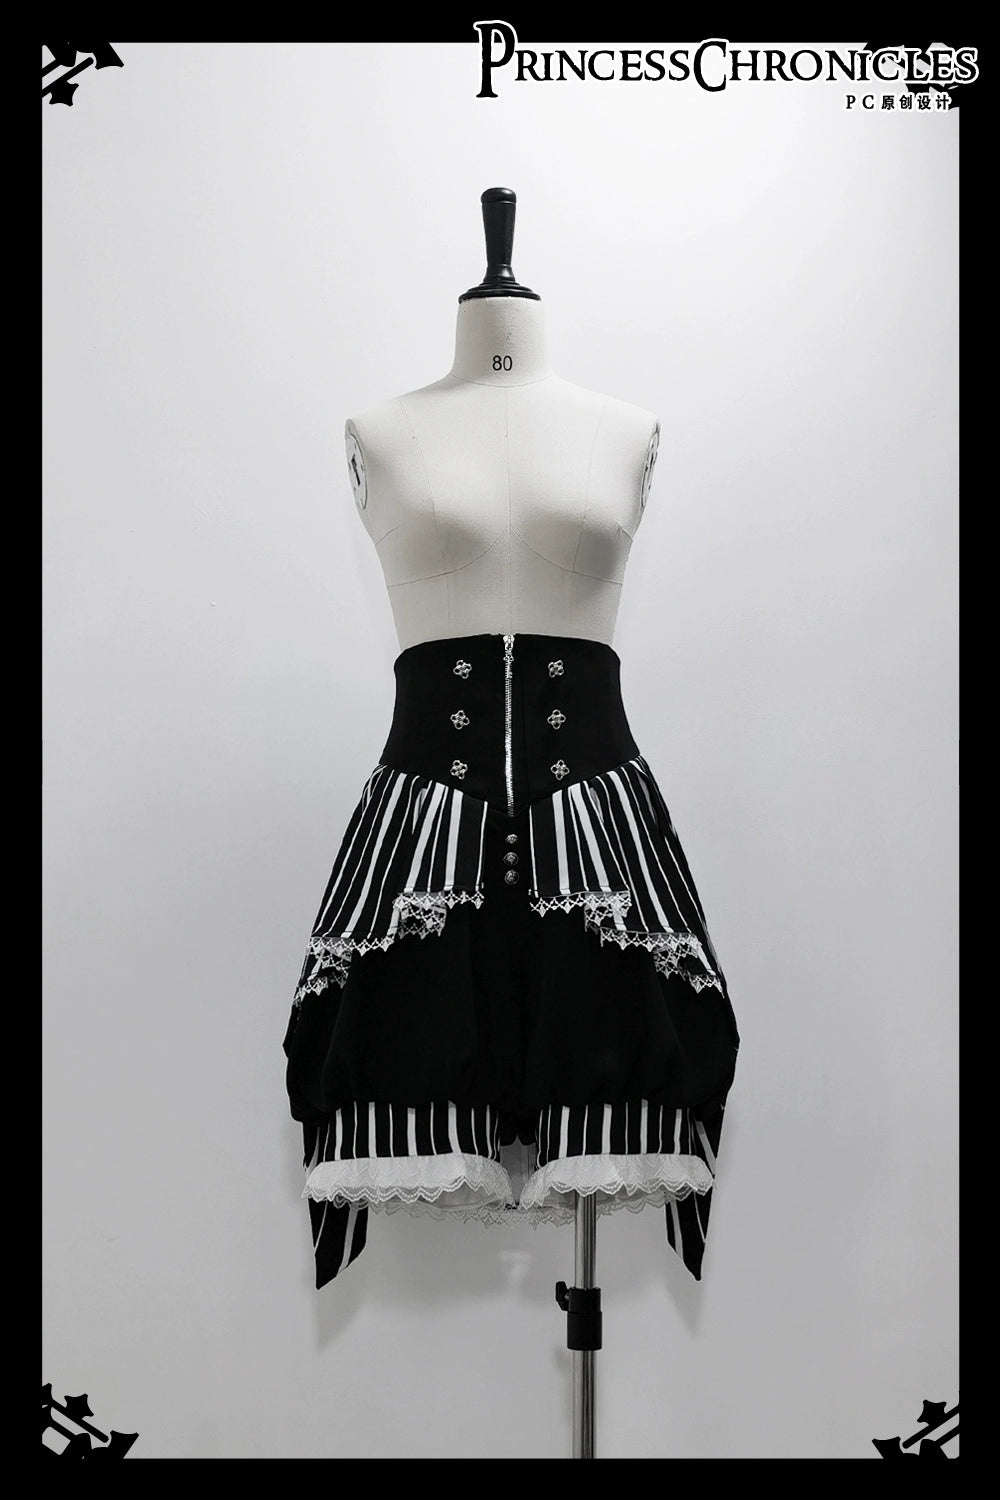 [Pre-orders available until 5/8] Marvelous Trick Prince-style striped shorts